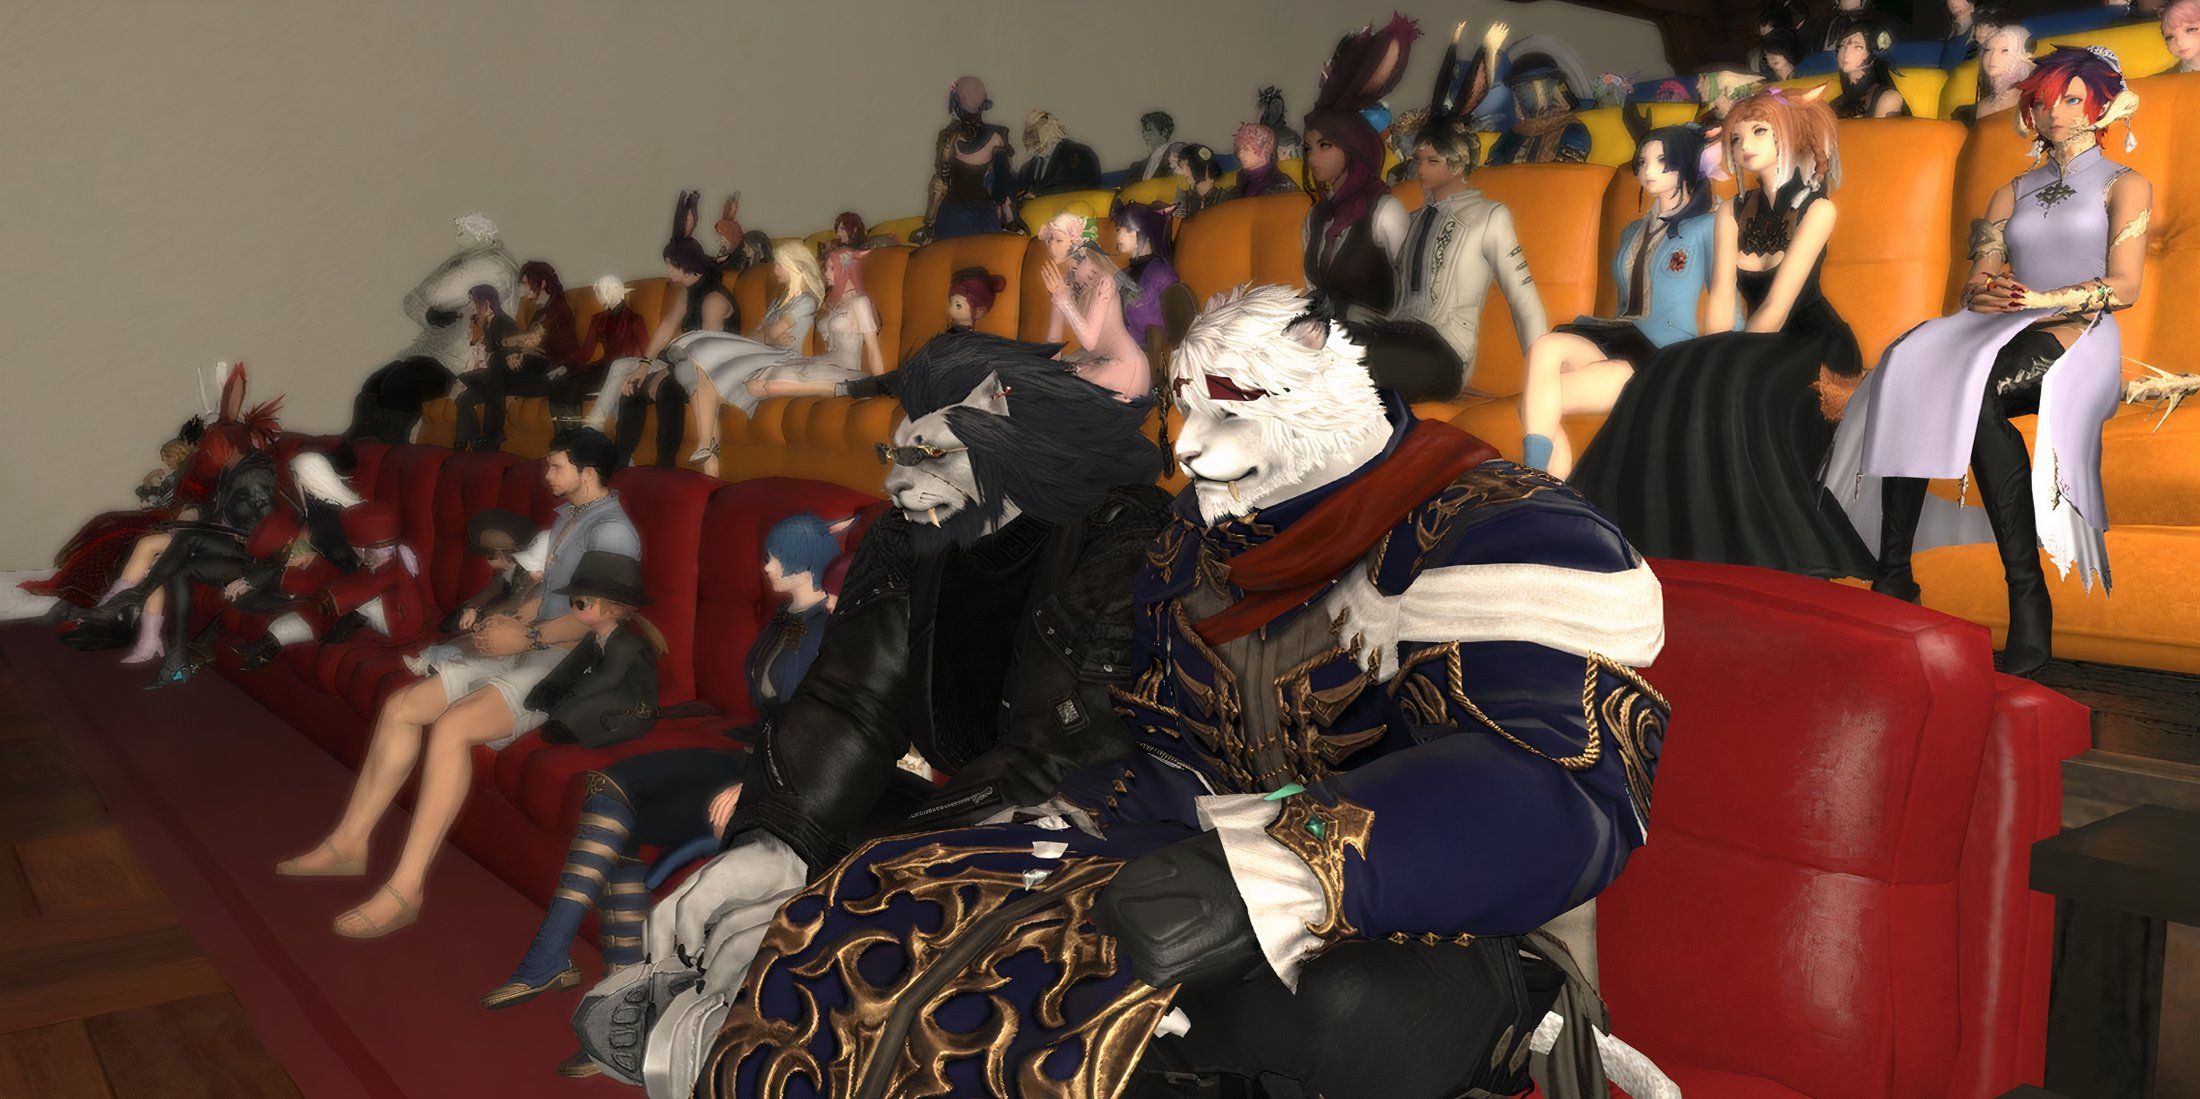 FF14-Theater-A Scandal in Bohemia-Audience